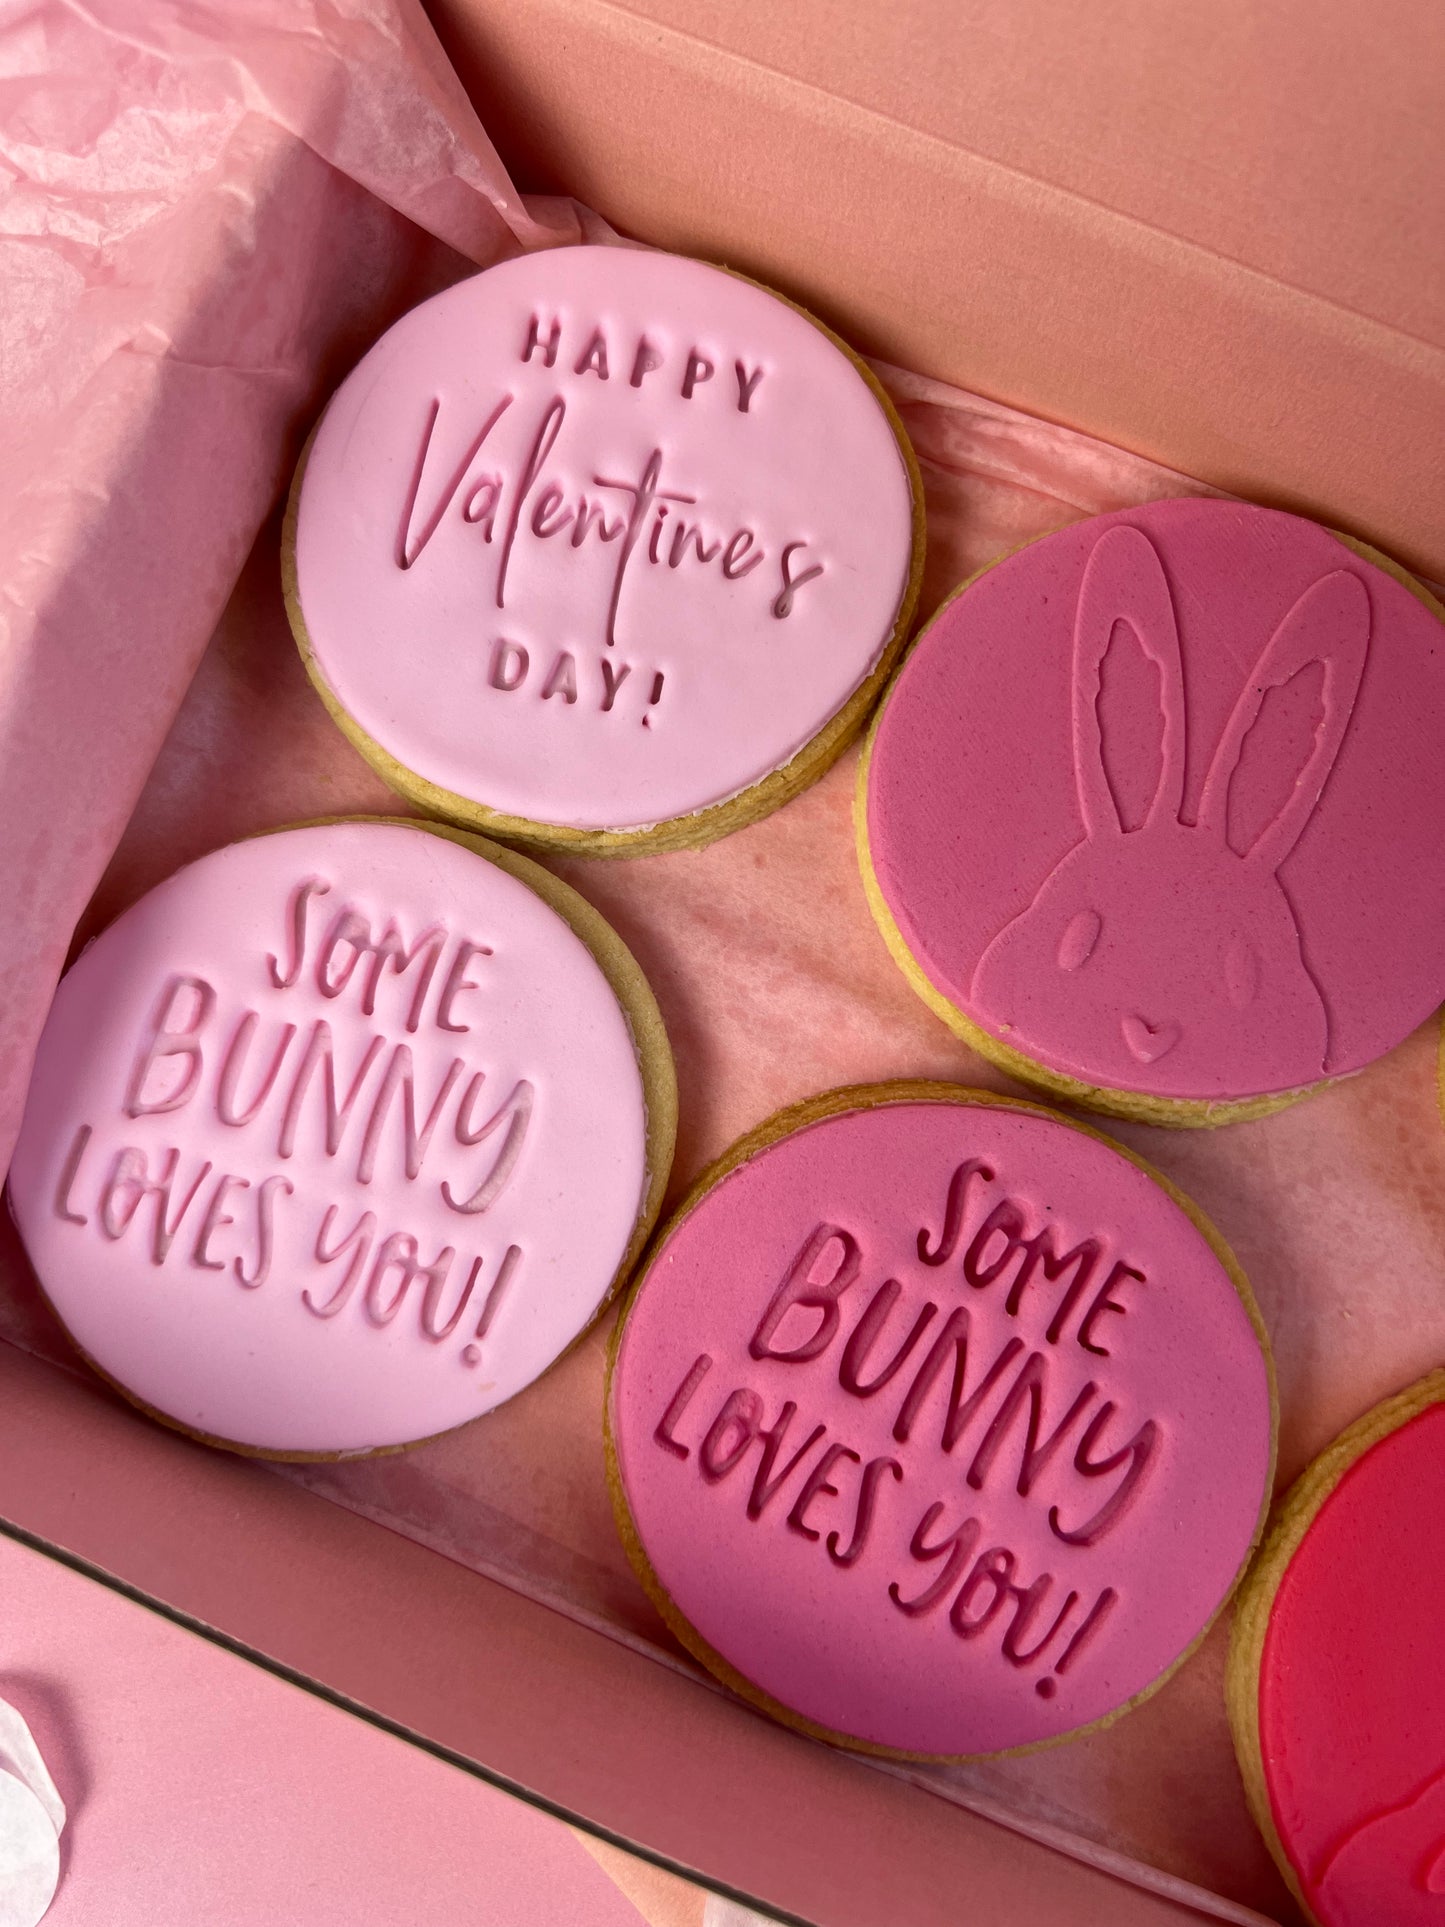 Some Bunny Loves You Cookies